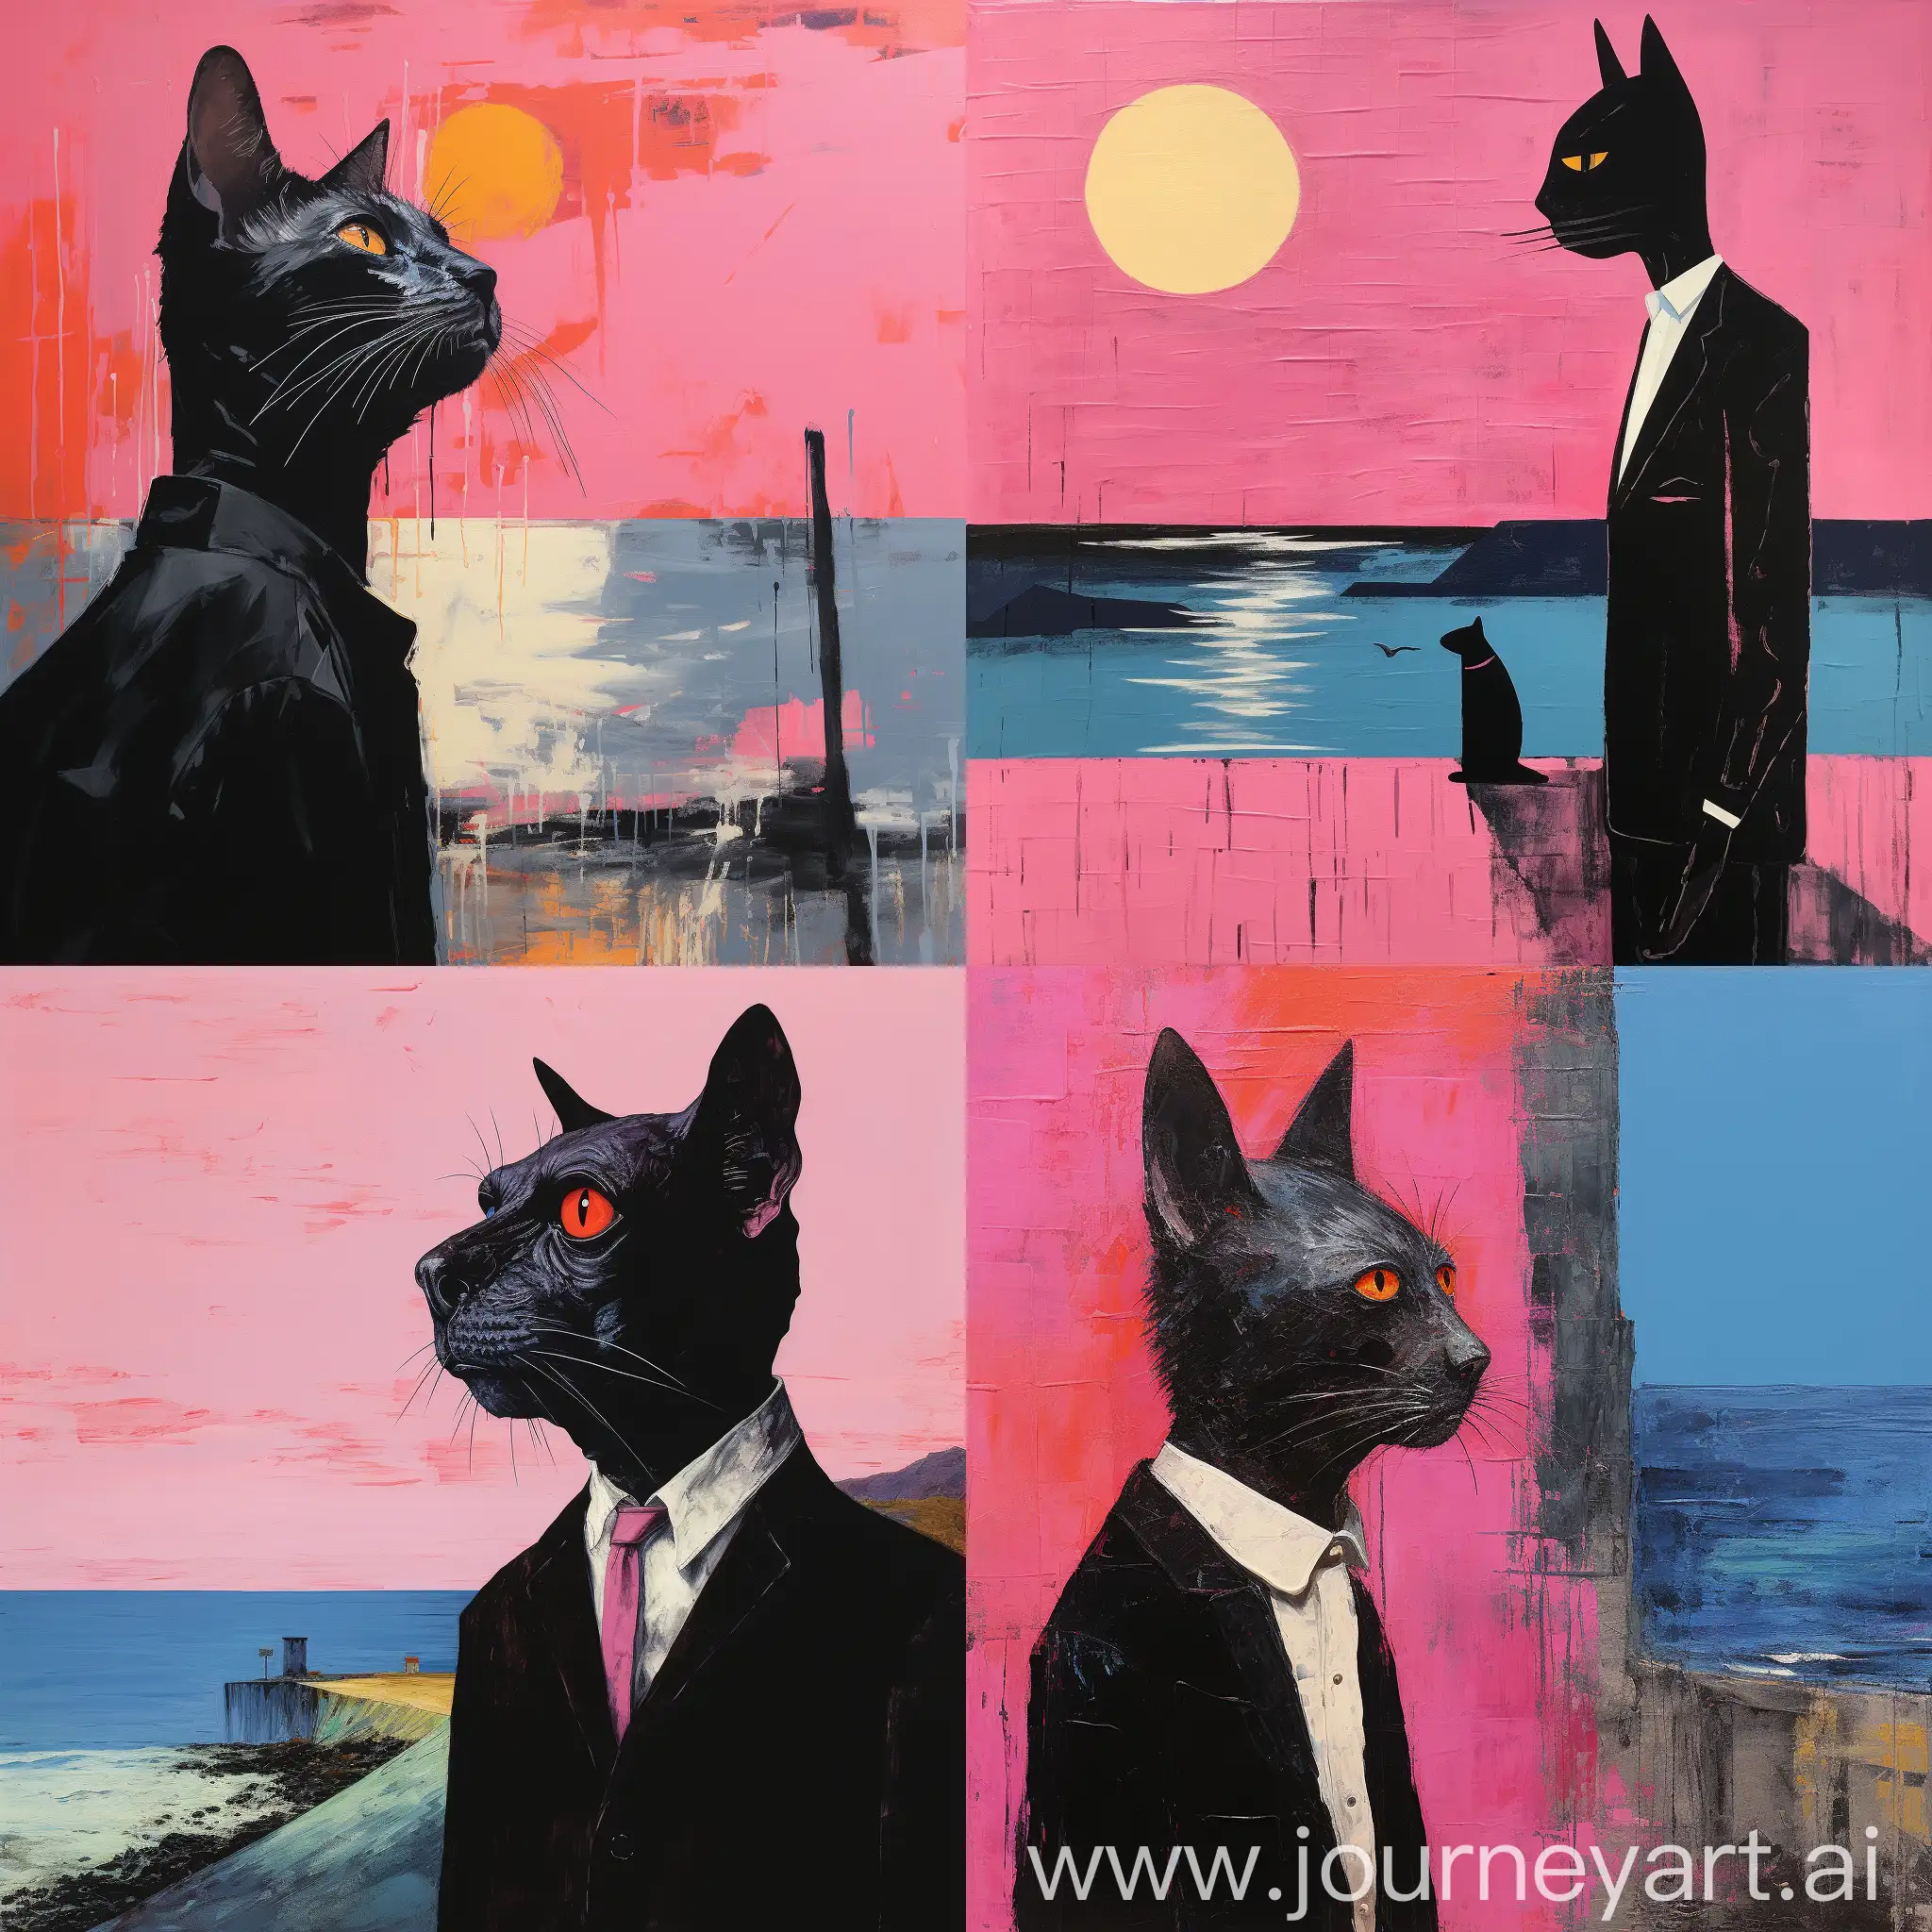 Serious-Black-Cat-Man-in-Pink-Suit-Whimsical-Yet-Somber-Portrait